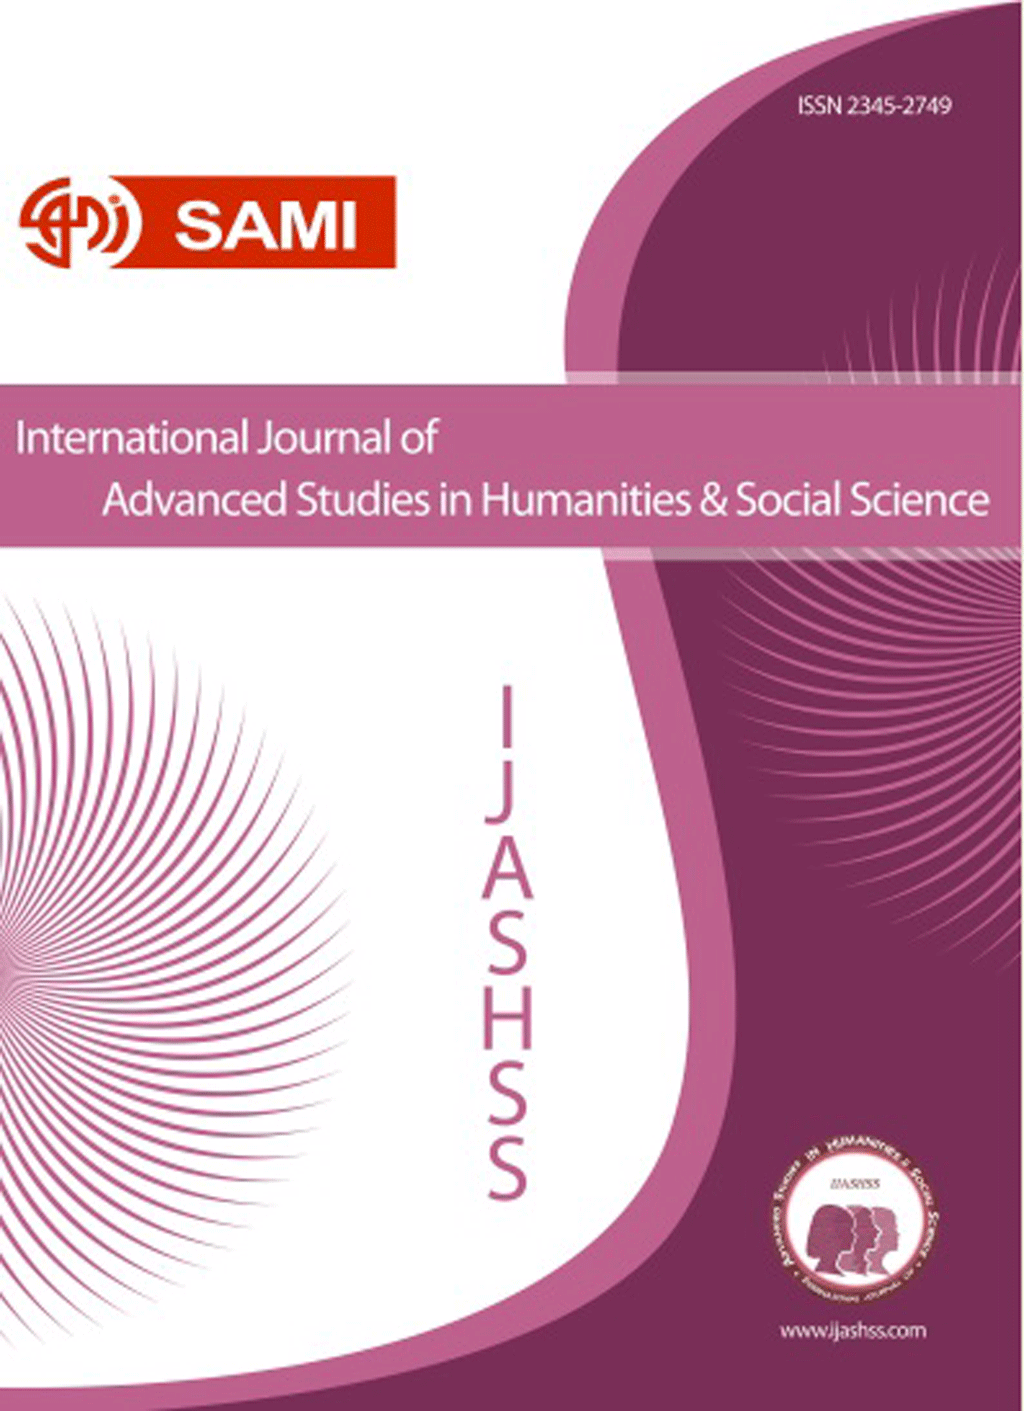 International Journal of Advanced Studies in Humanities and Social Science - October 2015, Volume 4 -  Issue 4